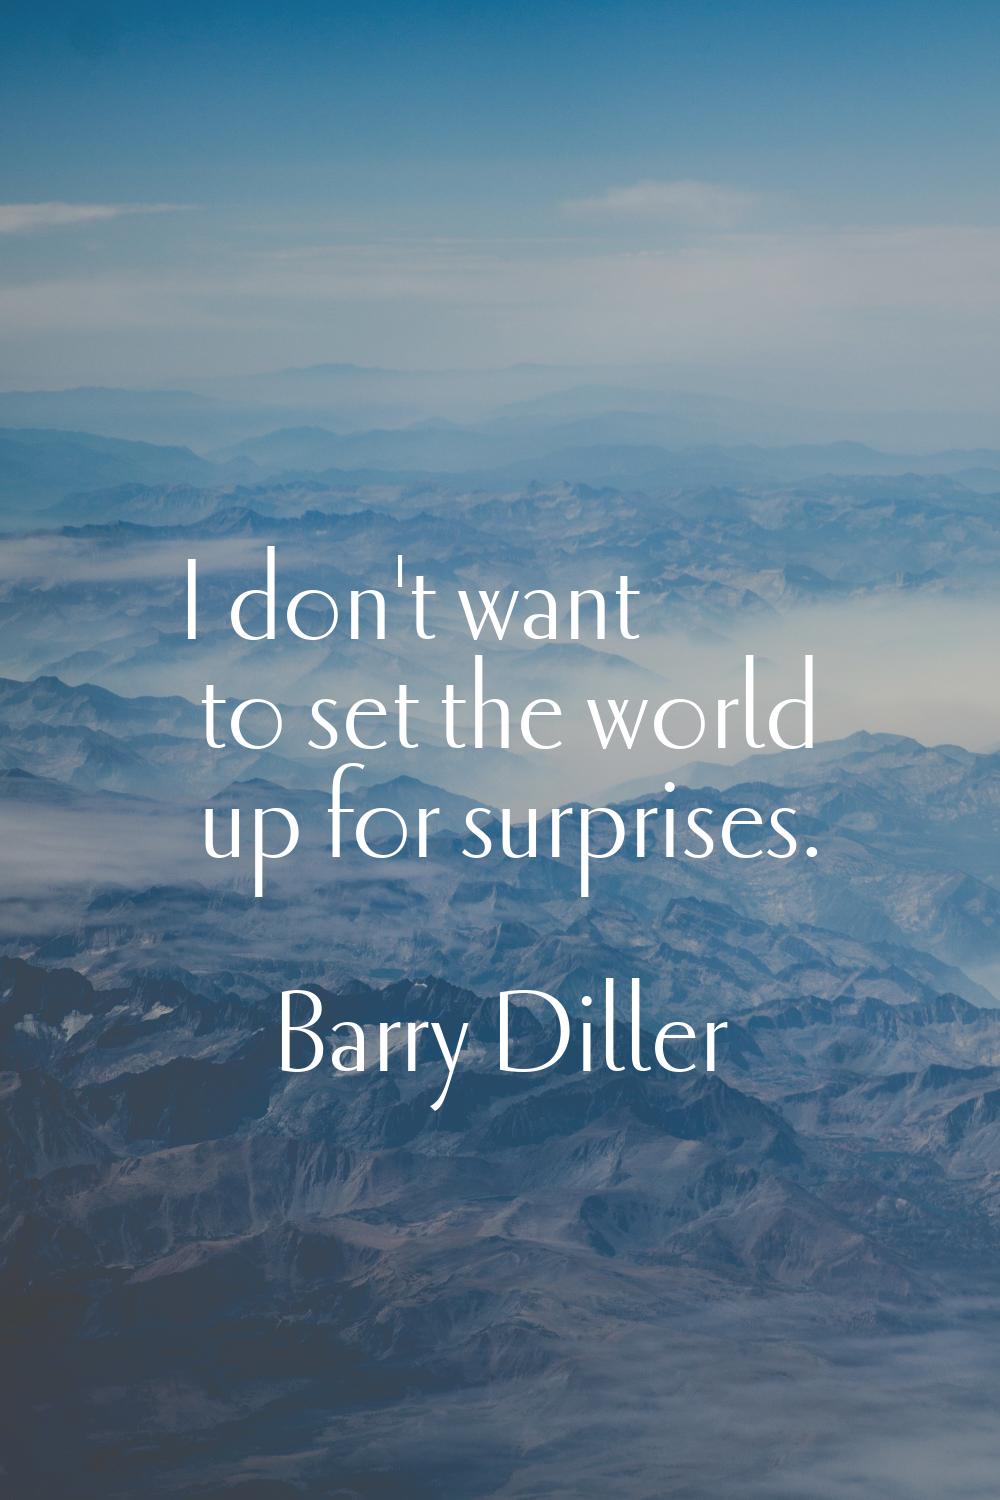 I don't want to set the world up for surprises.